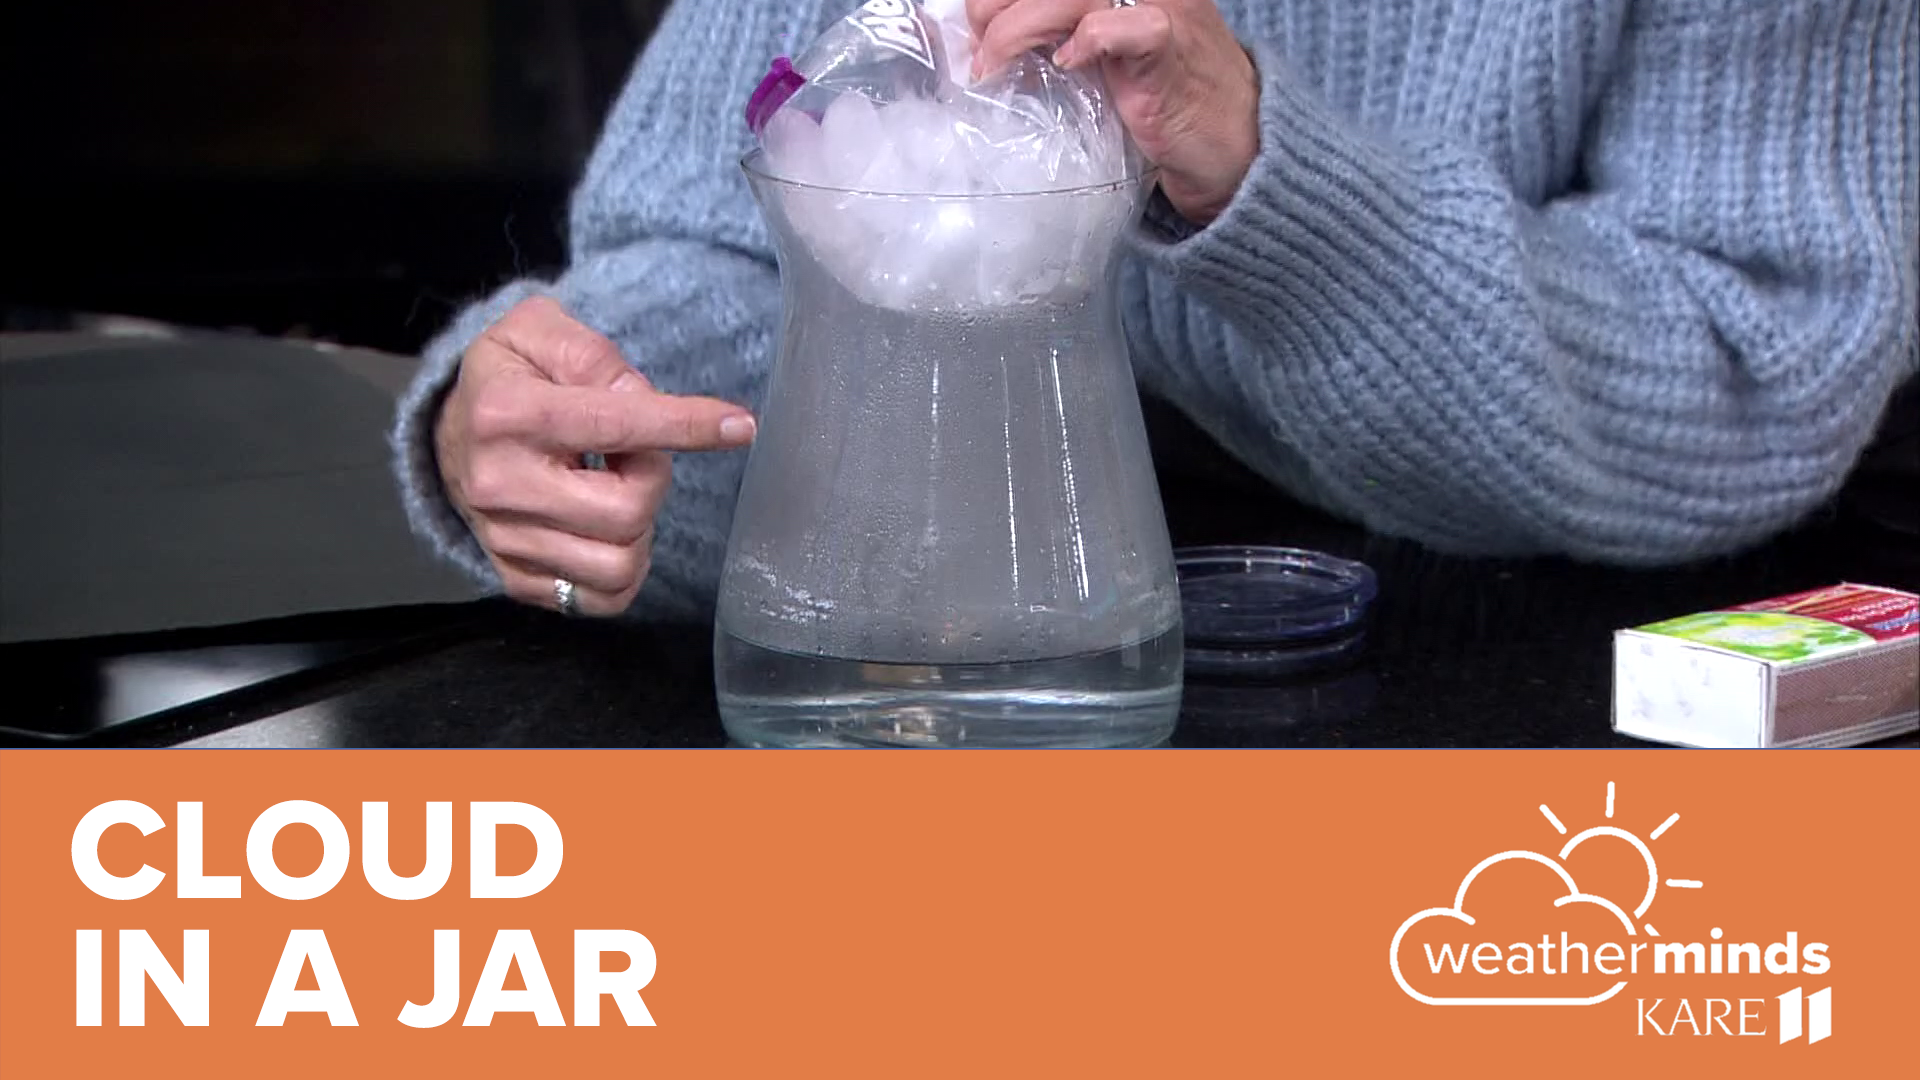 KARE 11 Meteorologist Belinda Jensen shows you how to make a real cloud inside a jar while learning about the water cycle!